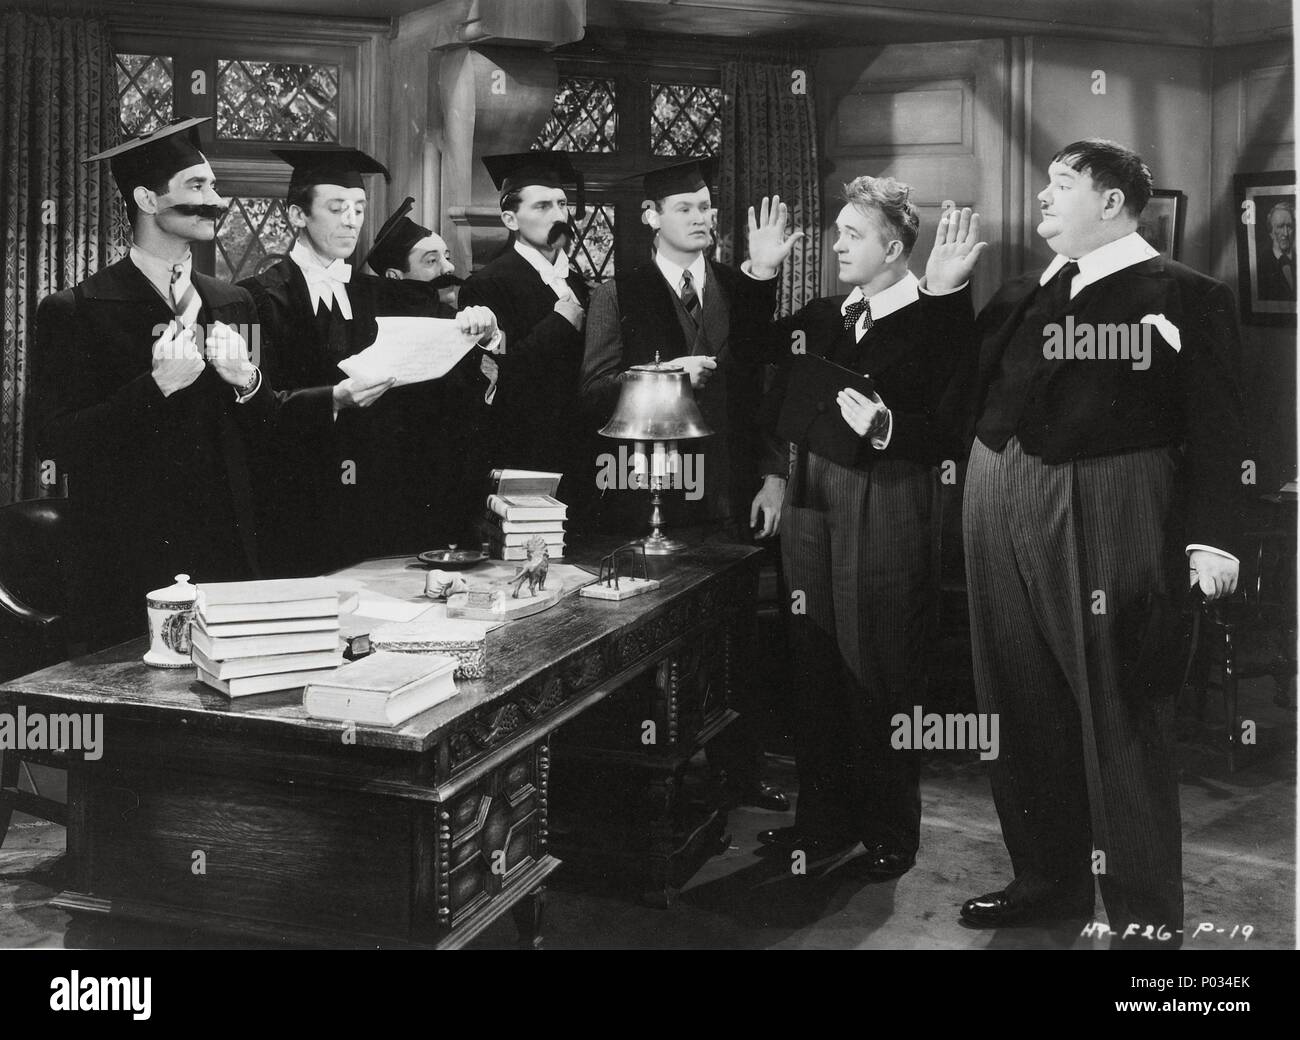 Original Film Title: A CHUMP AT OXFORD.  English Title: A CHUMP AT OXFORD.  Film Director: ALF GOULDING.  Year: 1940.  Stars: OLIVER HARDY; STAN LAUREL; PETER CUSHING. Credit: HAL ROACH/UNITED ARTISTS / Album Stock Photo